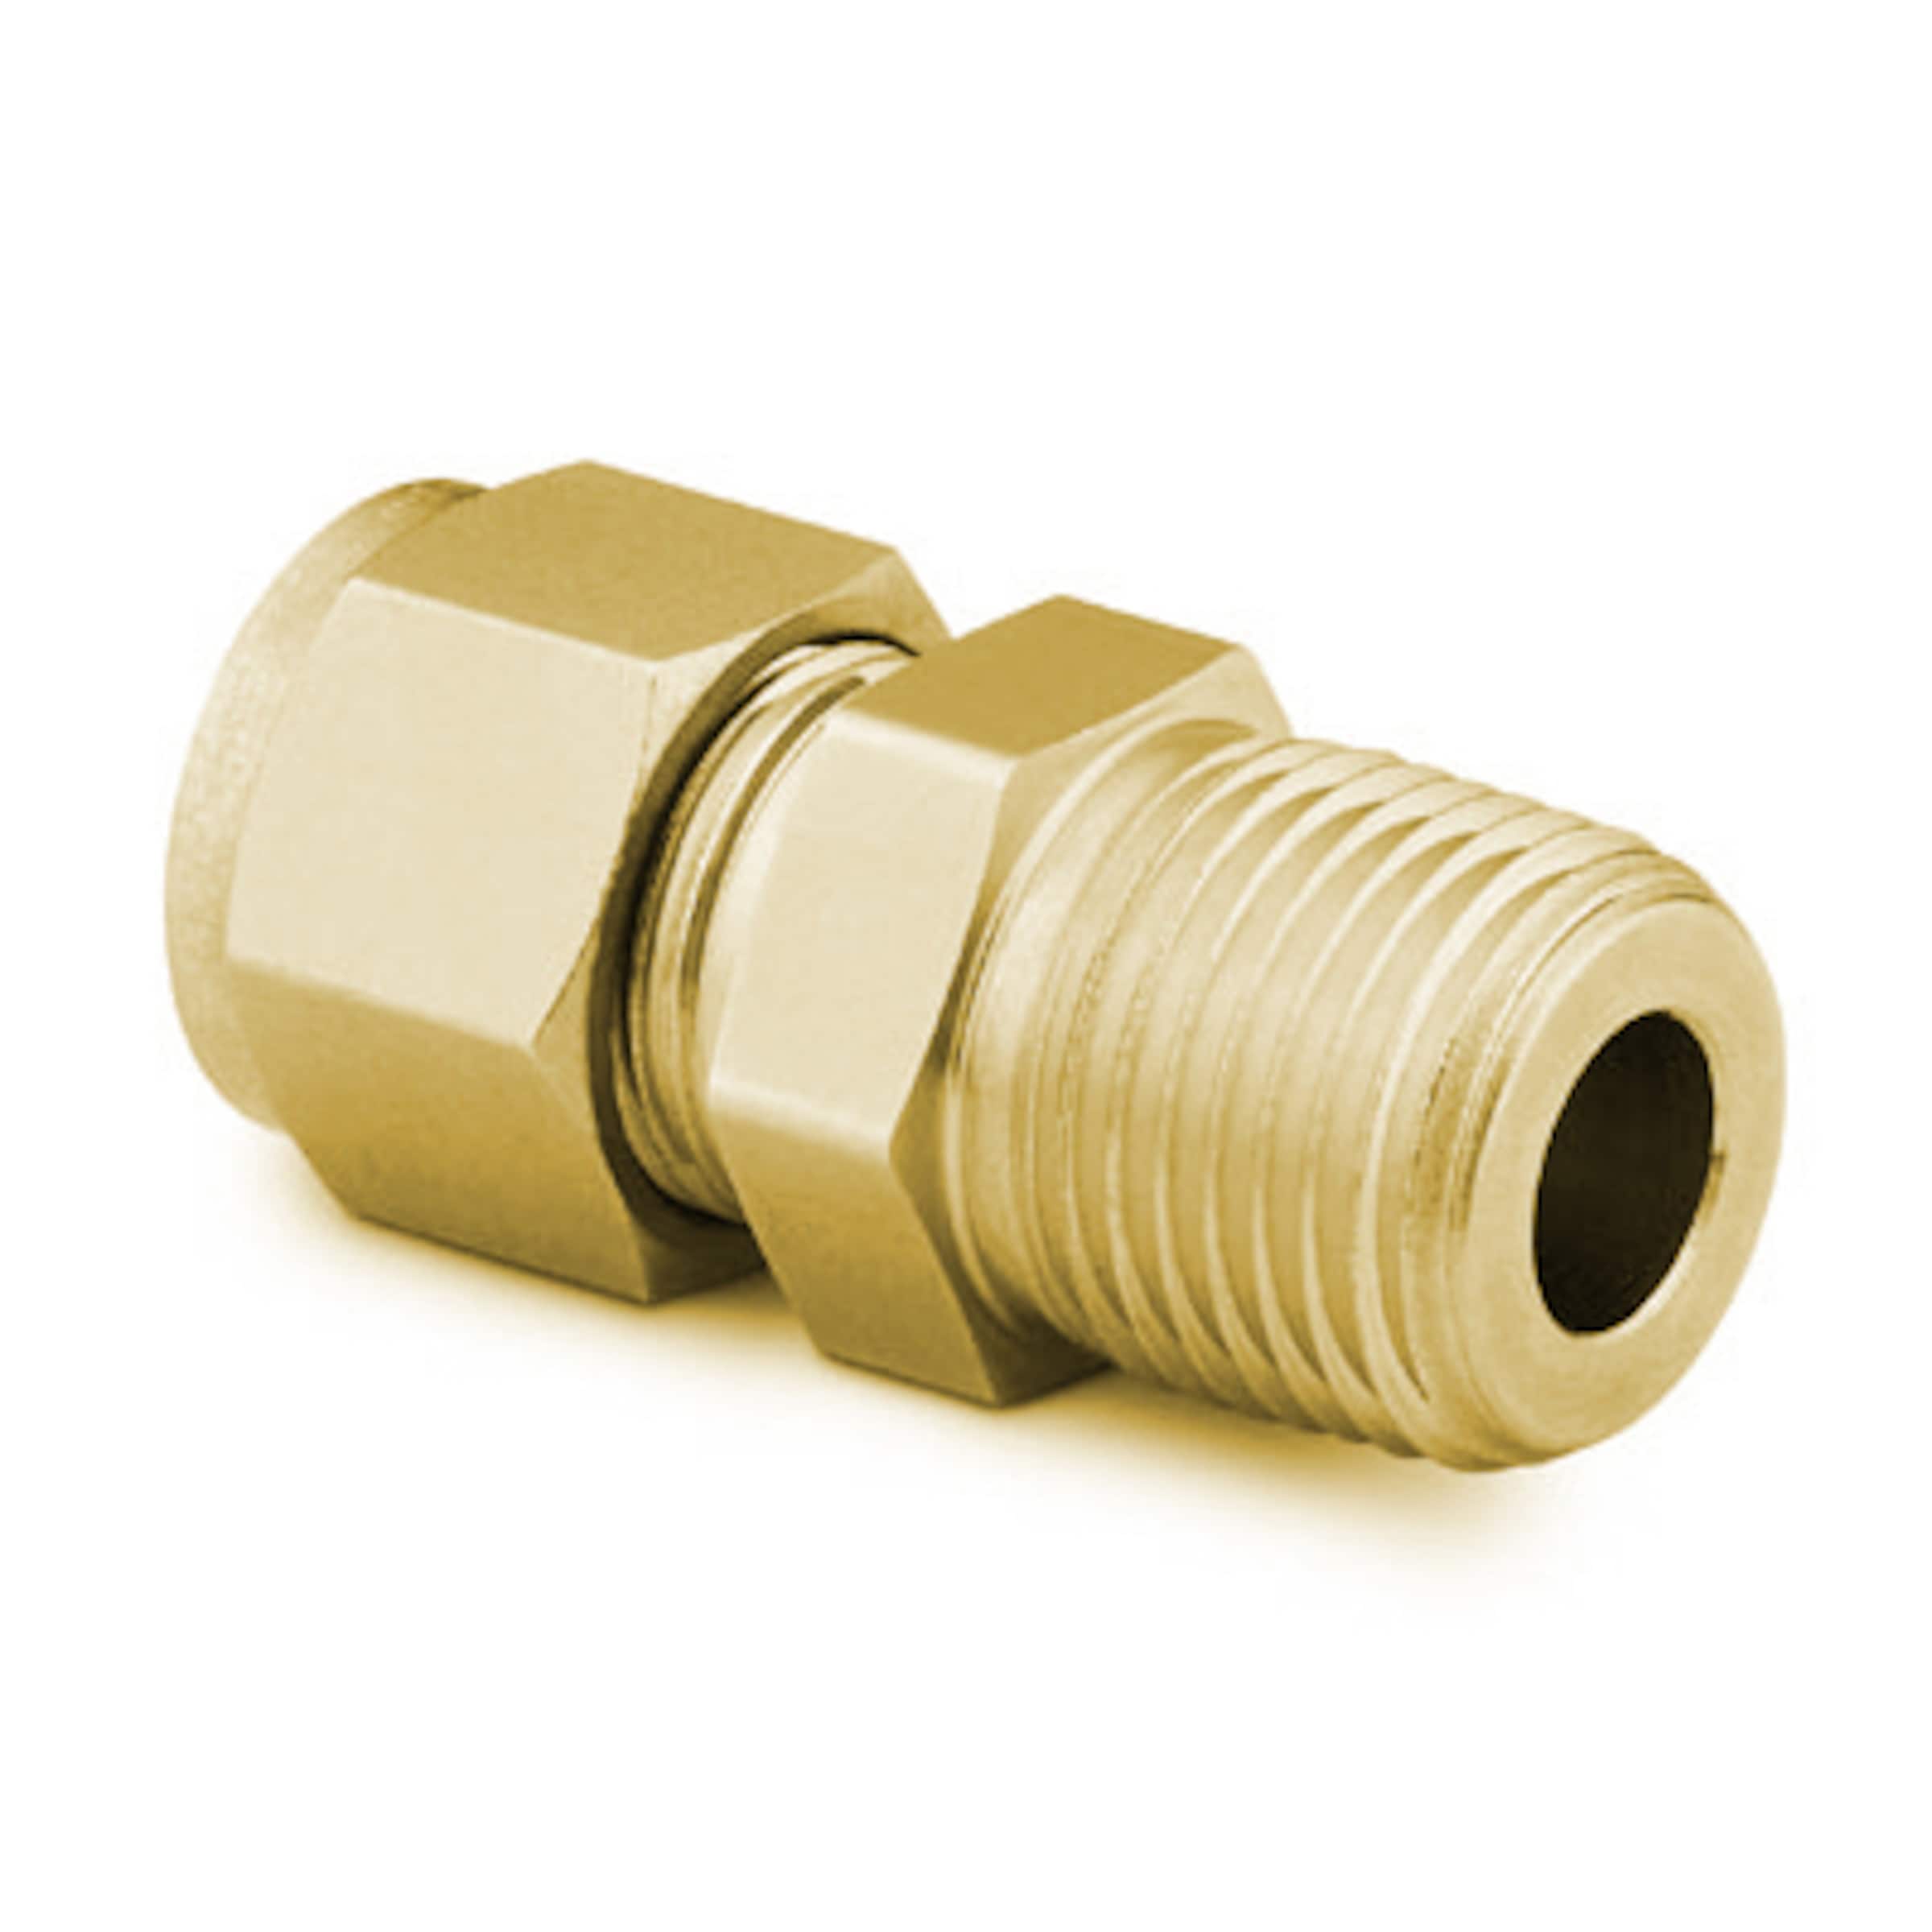 Uxcell Brass Compression Tube Fitting 6mm Tube OD to 1/8PT Male